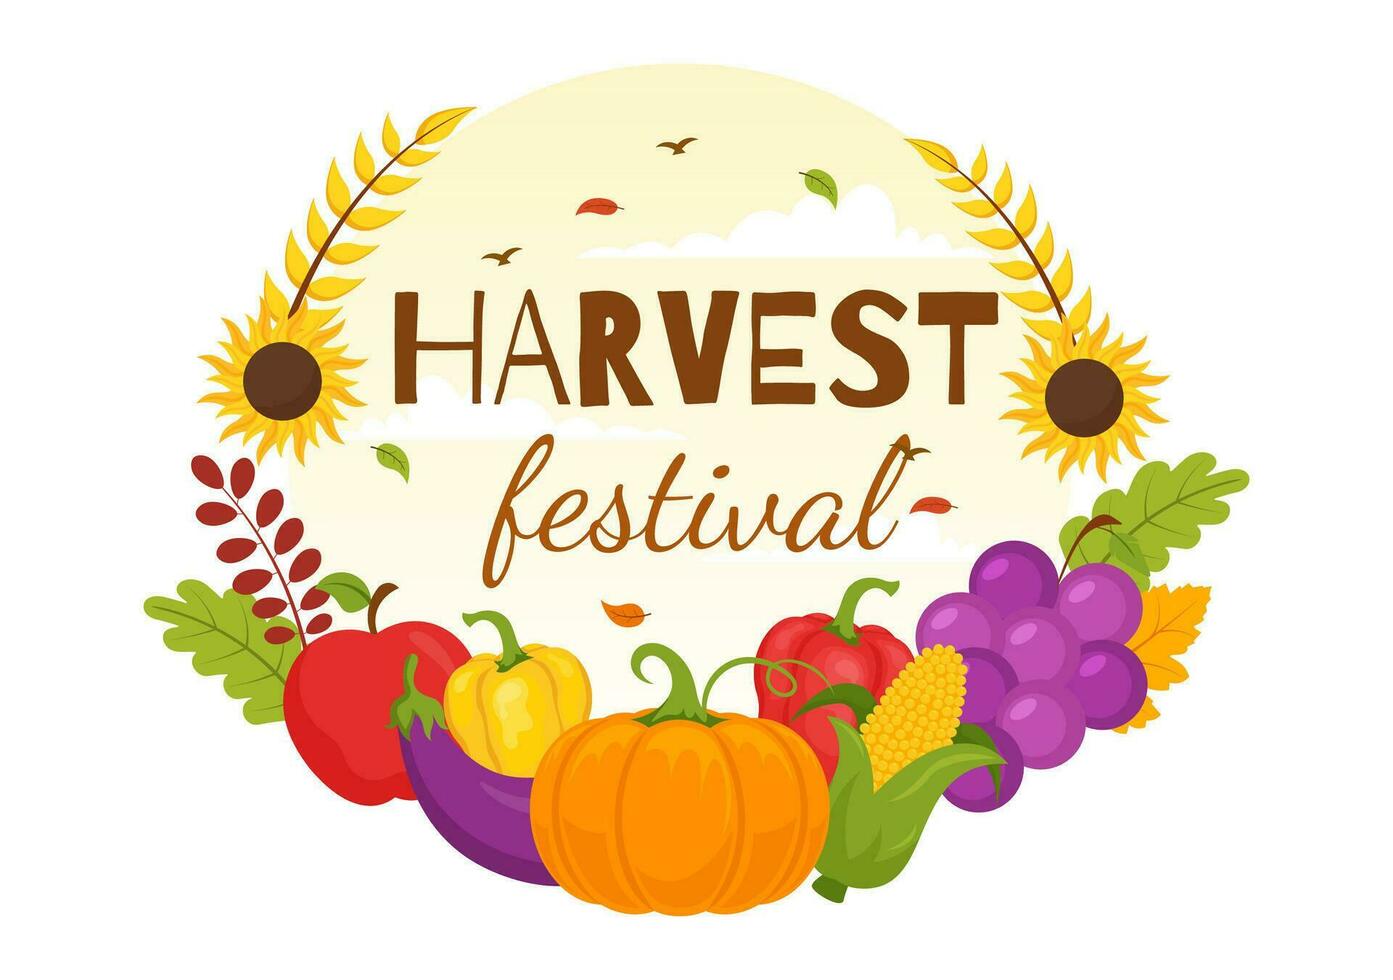 Happy Harvest Festival Vector Illustration of Autumn Season Background with Pumpkins, Maple Leaves, Fruits or Vegetables in Flat Cartoon Templates